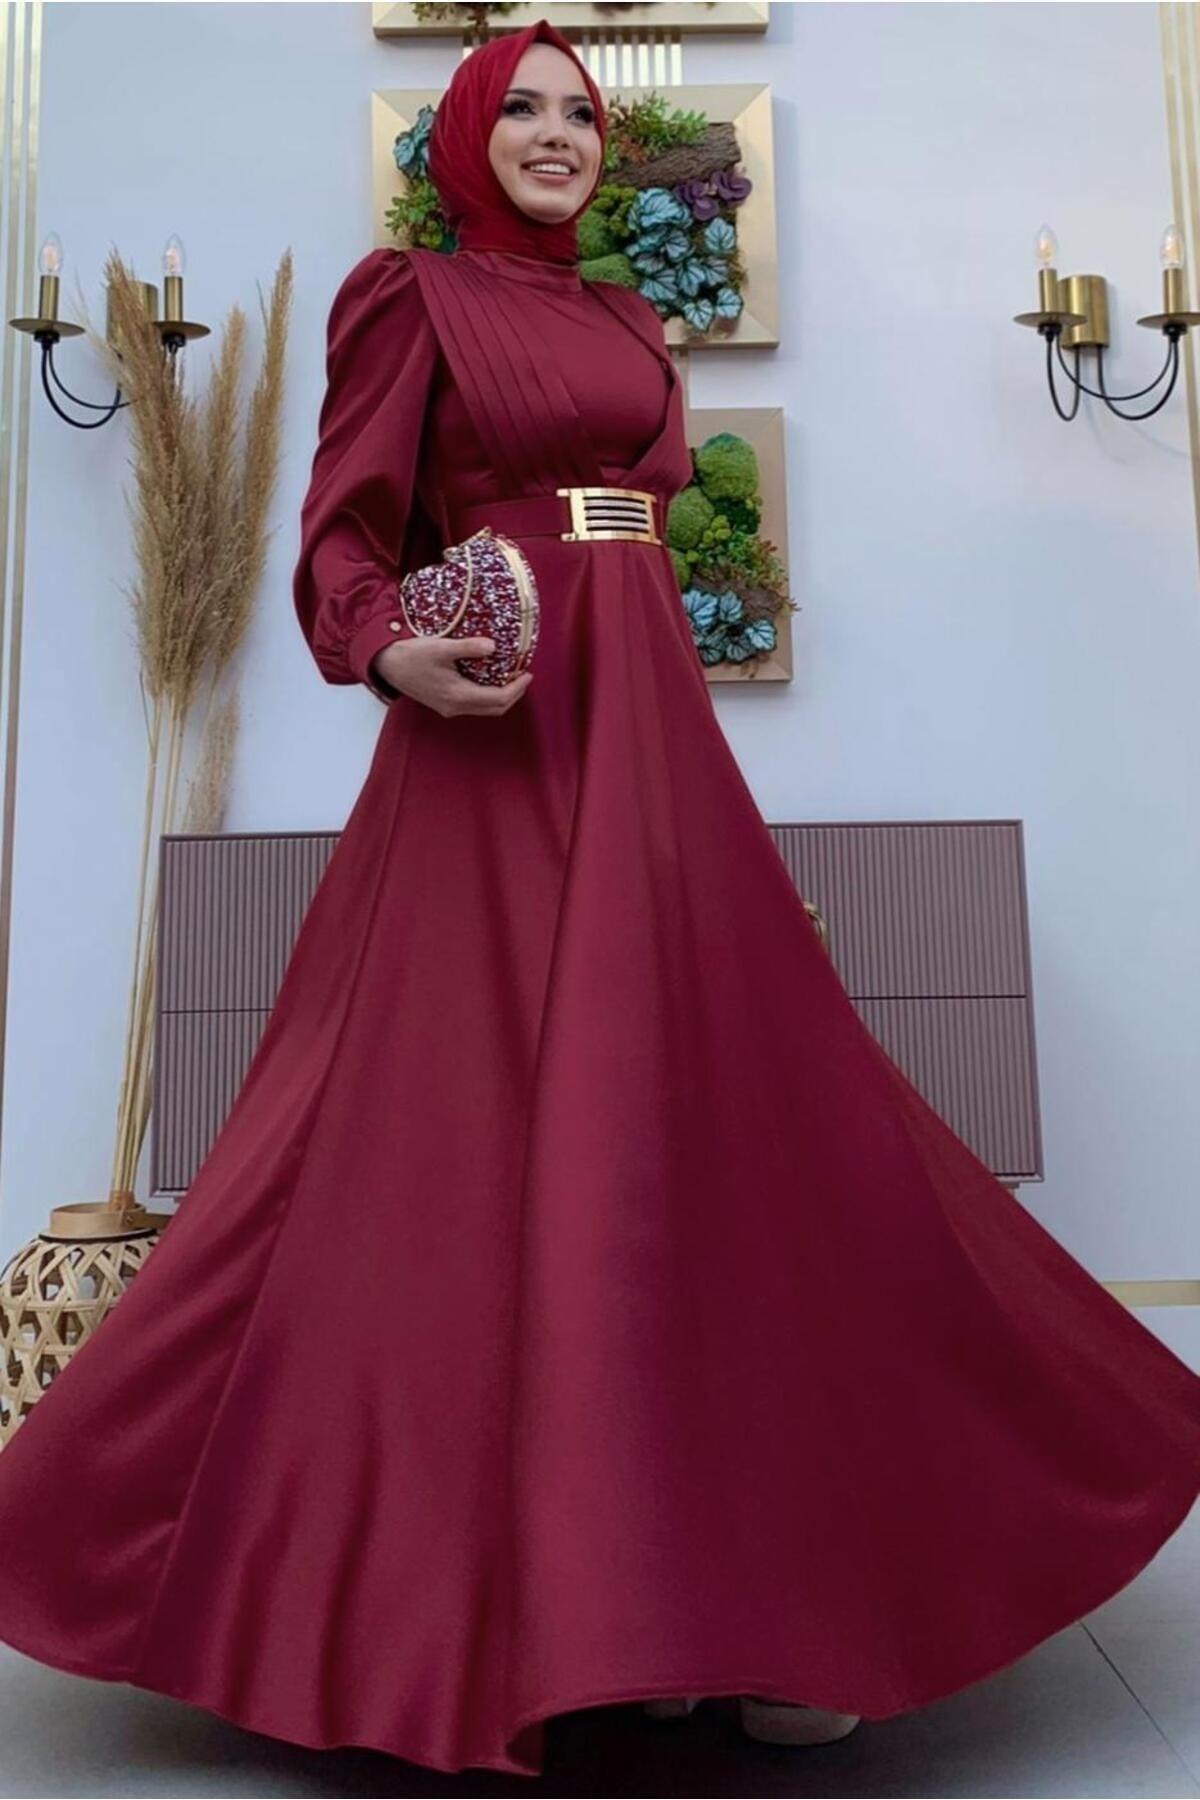 Women's Claret Red Belted Pleated Detailed Satin Evening Dress T 2973 - Swordslife